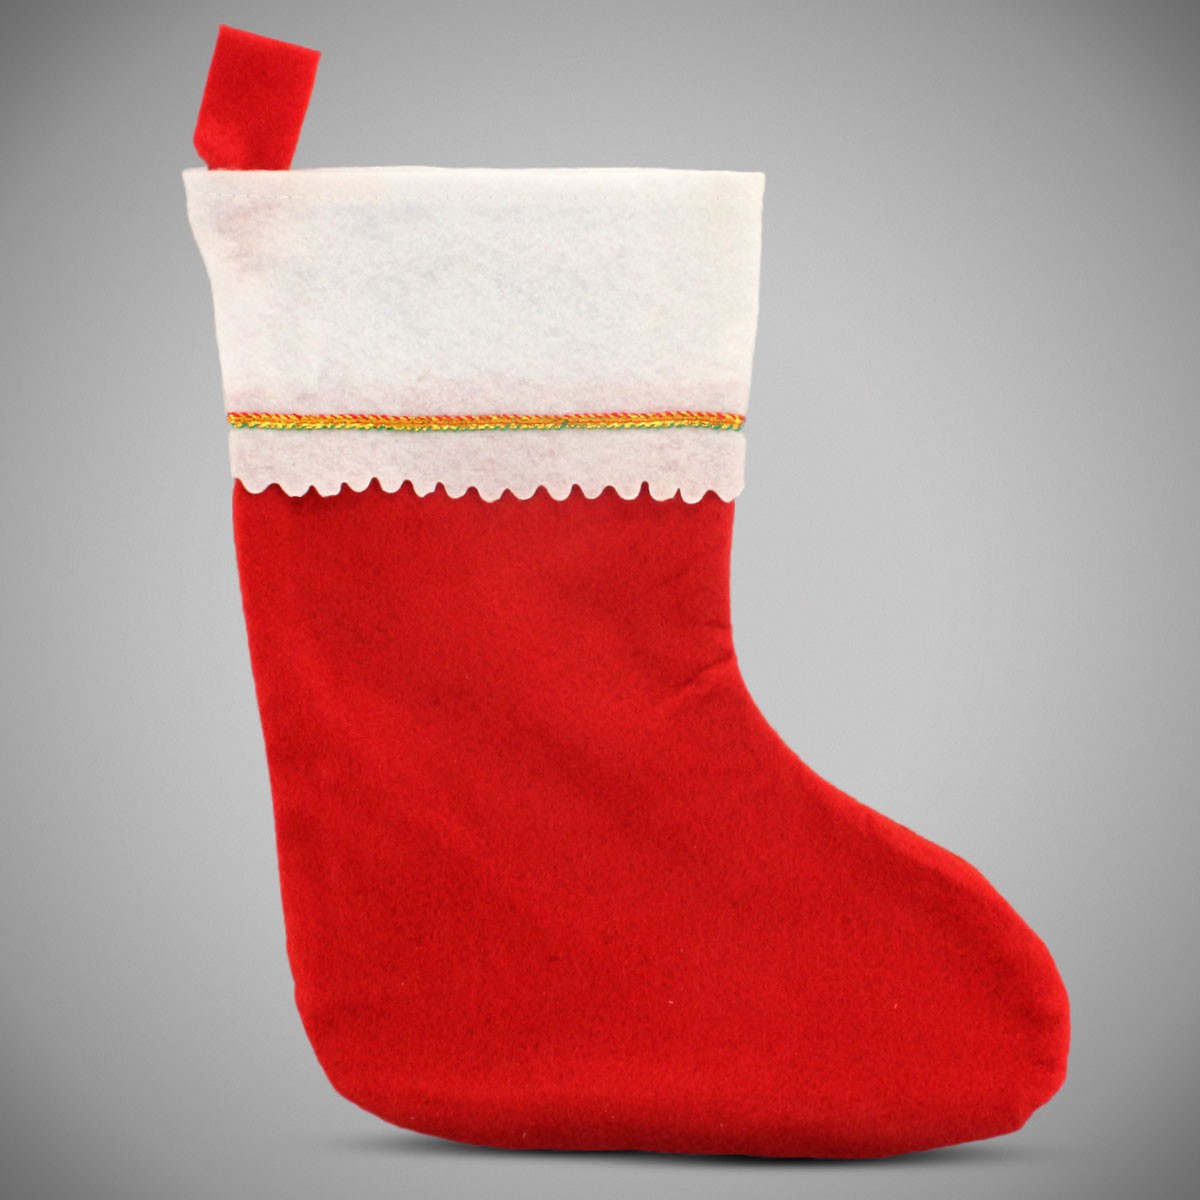 Red Felt Christmas Stocking - Imprinted - Noise Makers & Non Light Up ...